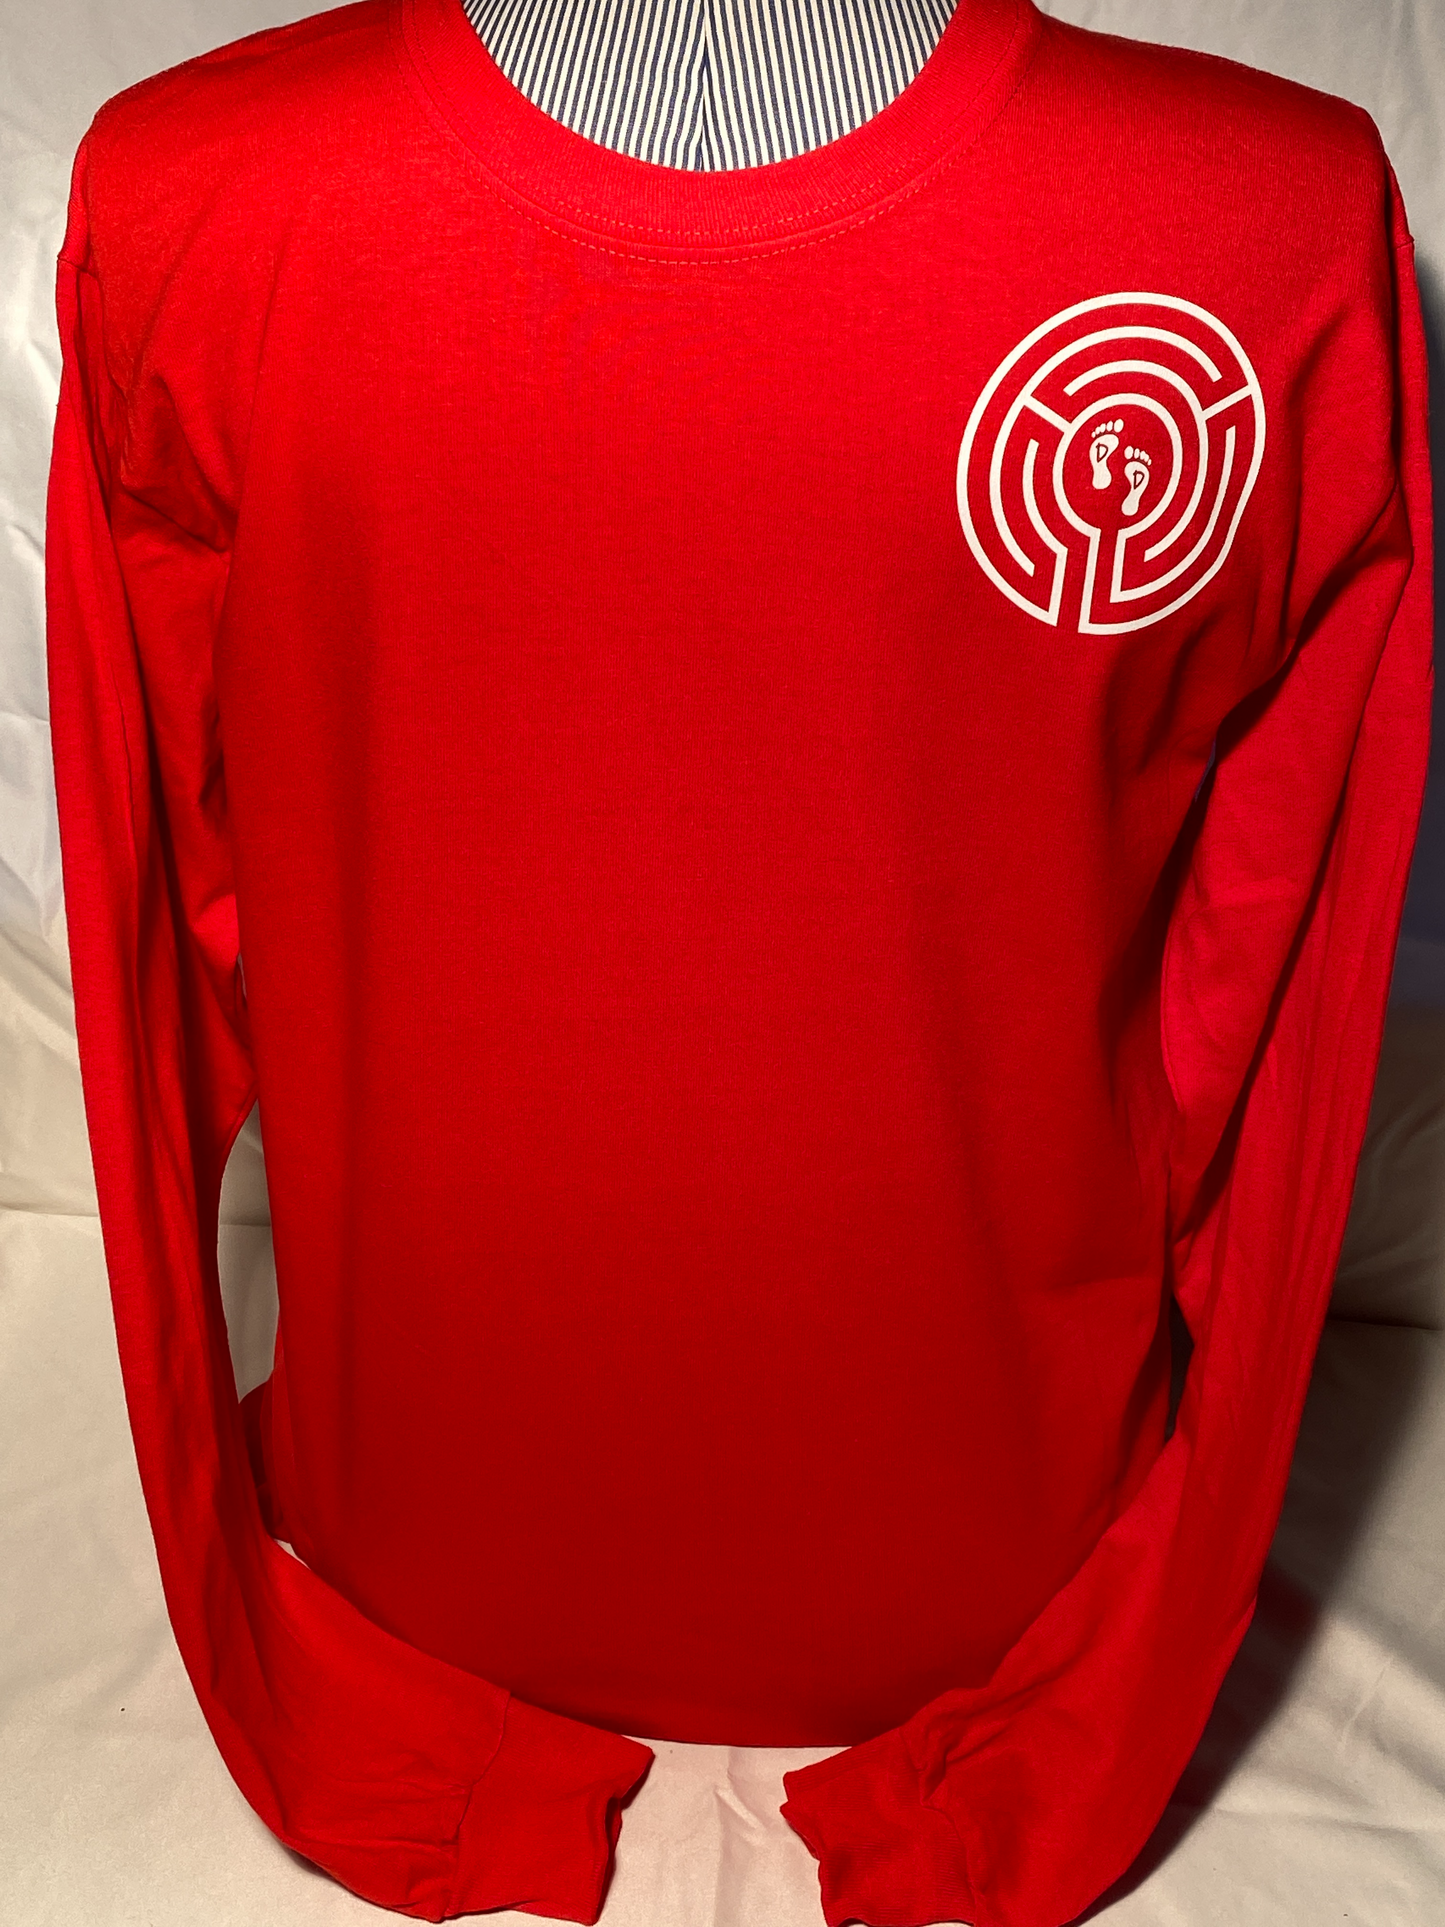 Men's red long-sleeved T-shirt.  This shirt is high quality 5.3 oz., 100% cotton.